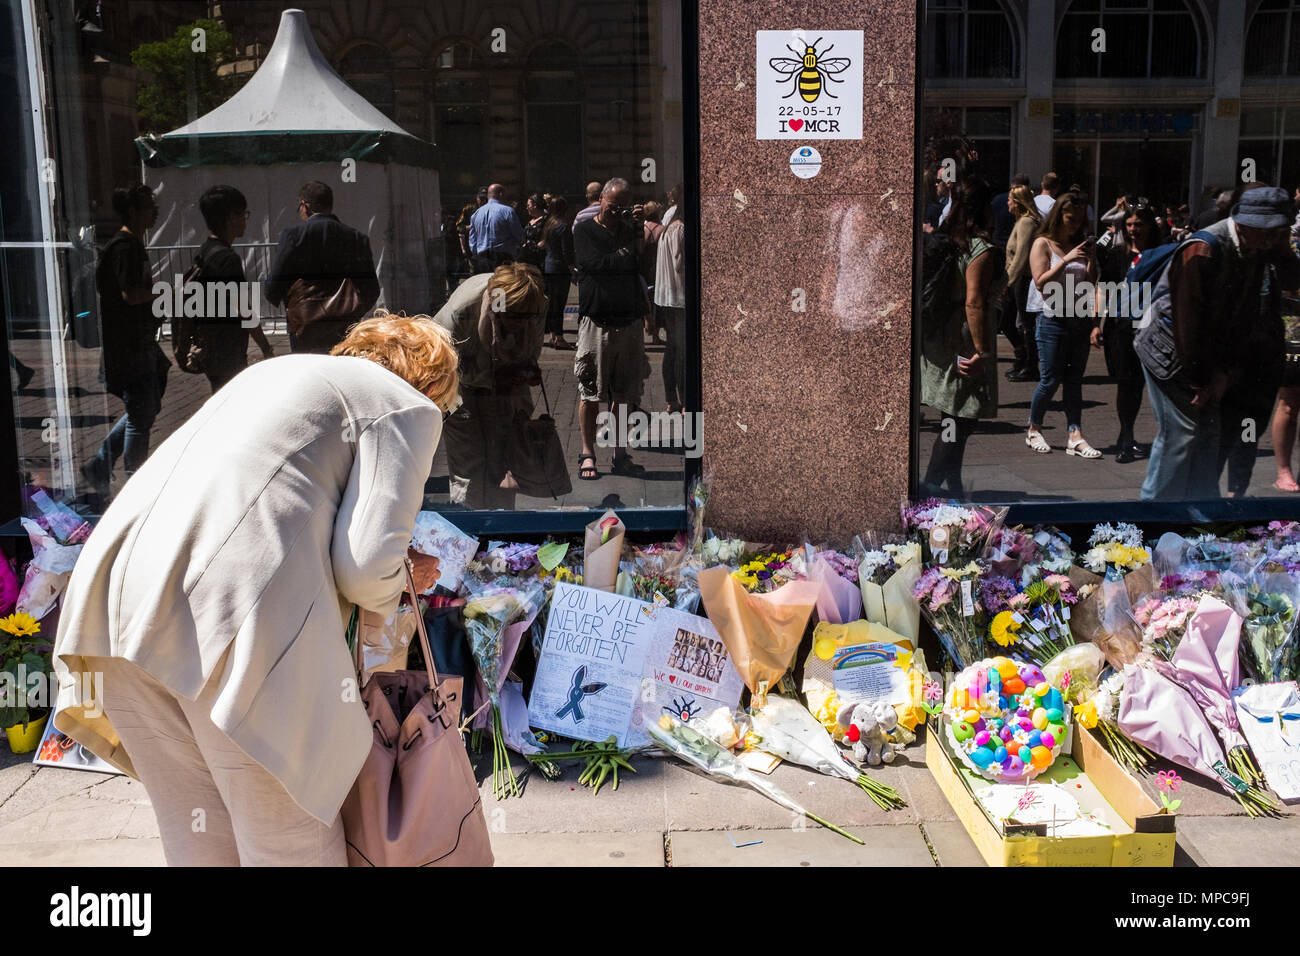 St Anne's Square, Manchester, UK. 22nd May, 2018. A woman reads messages in St. Anne's Square, Manchester remembering the victims of the Manchester Arena bombing on it's 1st anniversary. Credit: Ian Walker/Alamy Live News Stock Photo